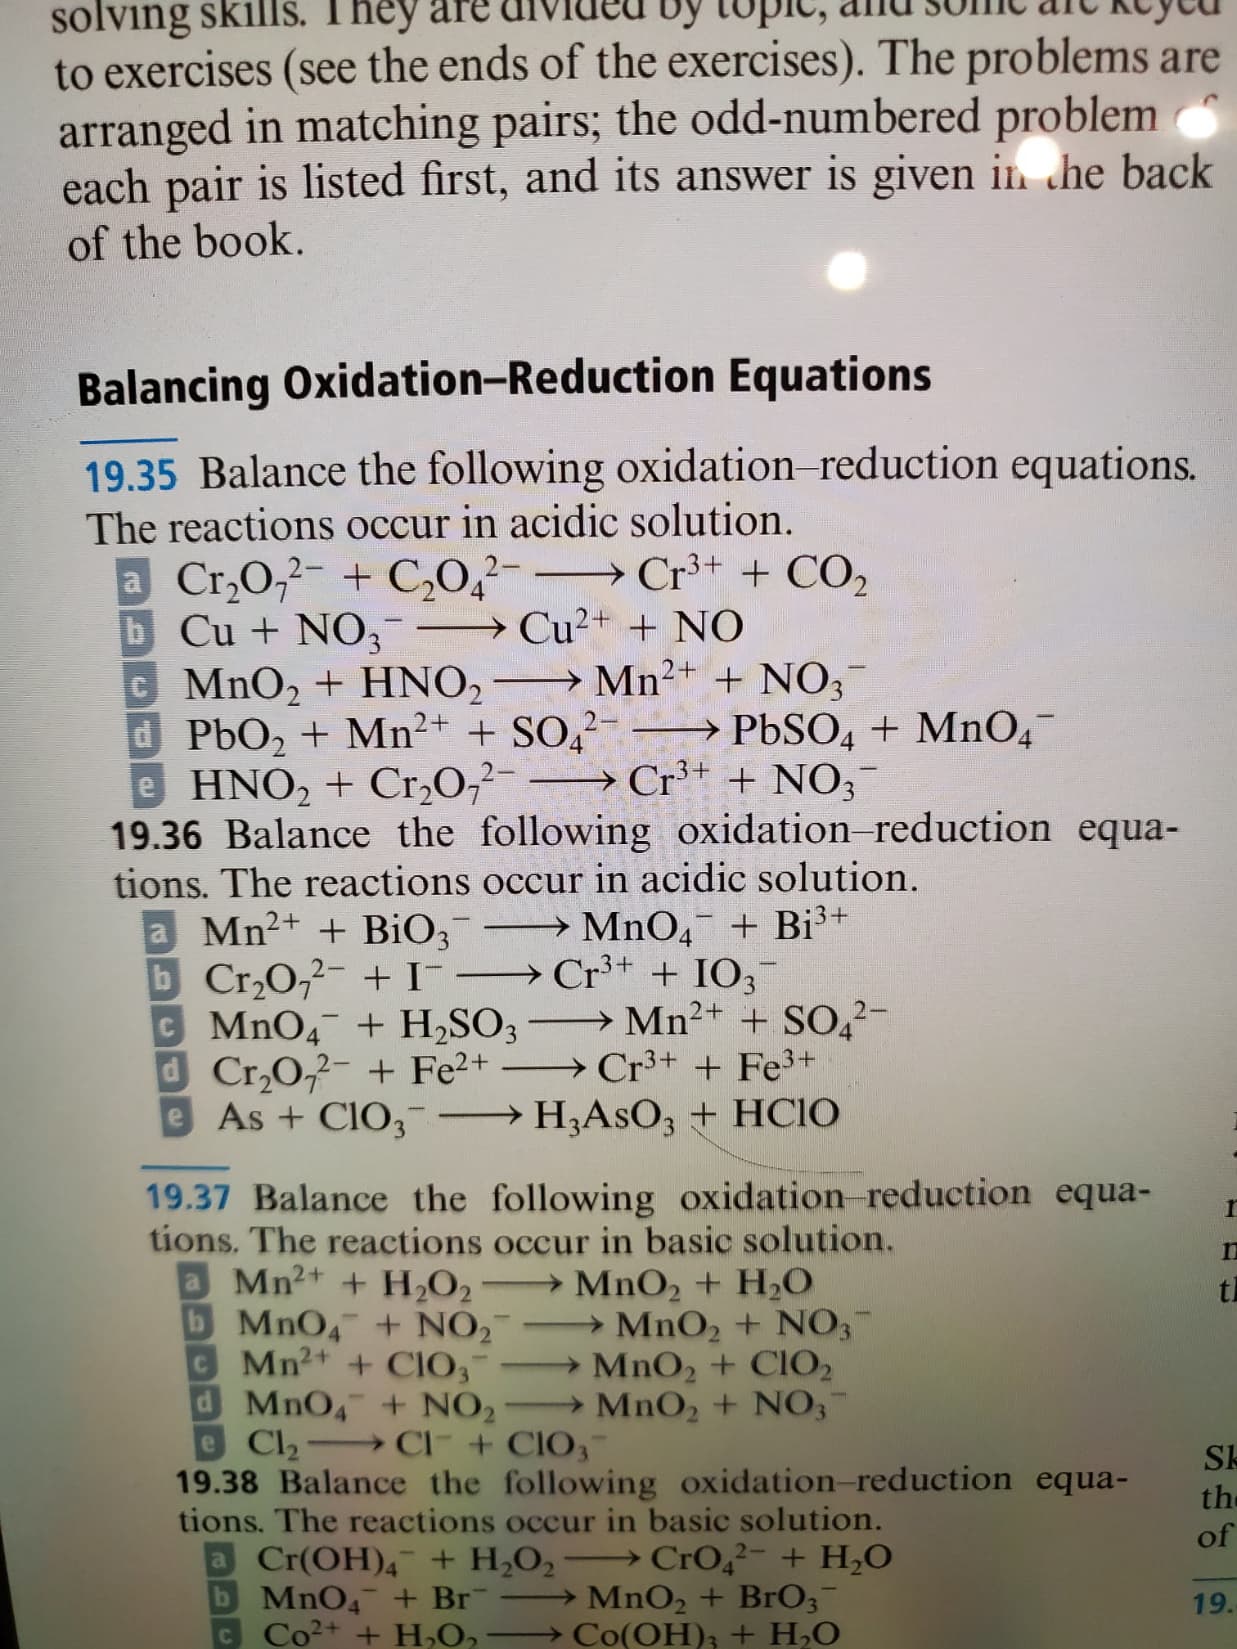 19.35 Balance the following oxidation-reduction equations.
The reactions occur in acidic solution.
a
Cr,0,2- + C,0,²- → Cr³* + CO,
b Cu + NO,- → Cu²+ + NO
CMNO2 + HNO, Mn2+ + NO;
d PbO2 + Mn²+ + SO,2- -
HNO, + Cr,0,²- → Cr³+ + NO;
→CU2+ + NO
→ PBSO, + MNO̟¯
